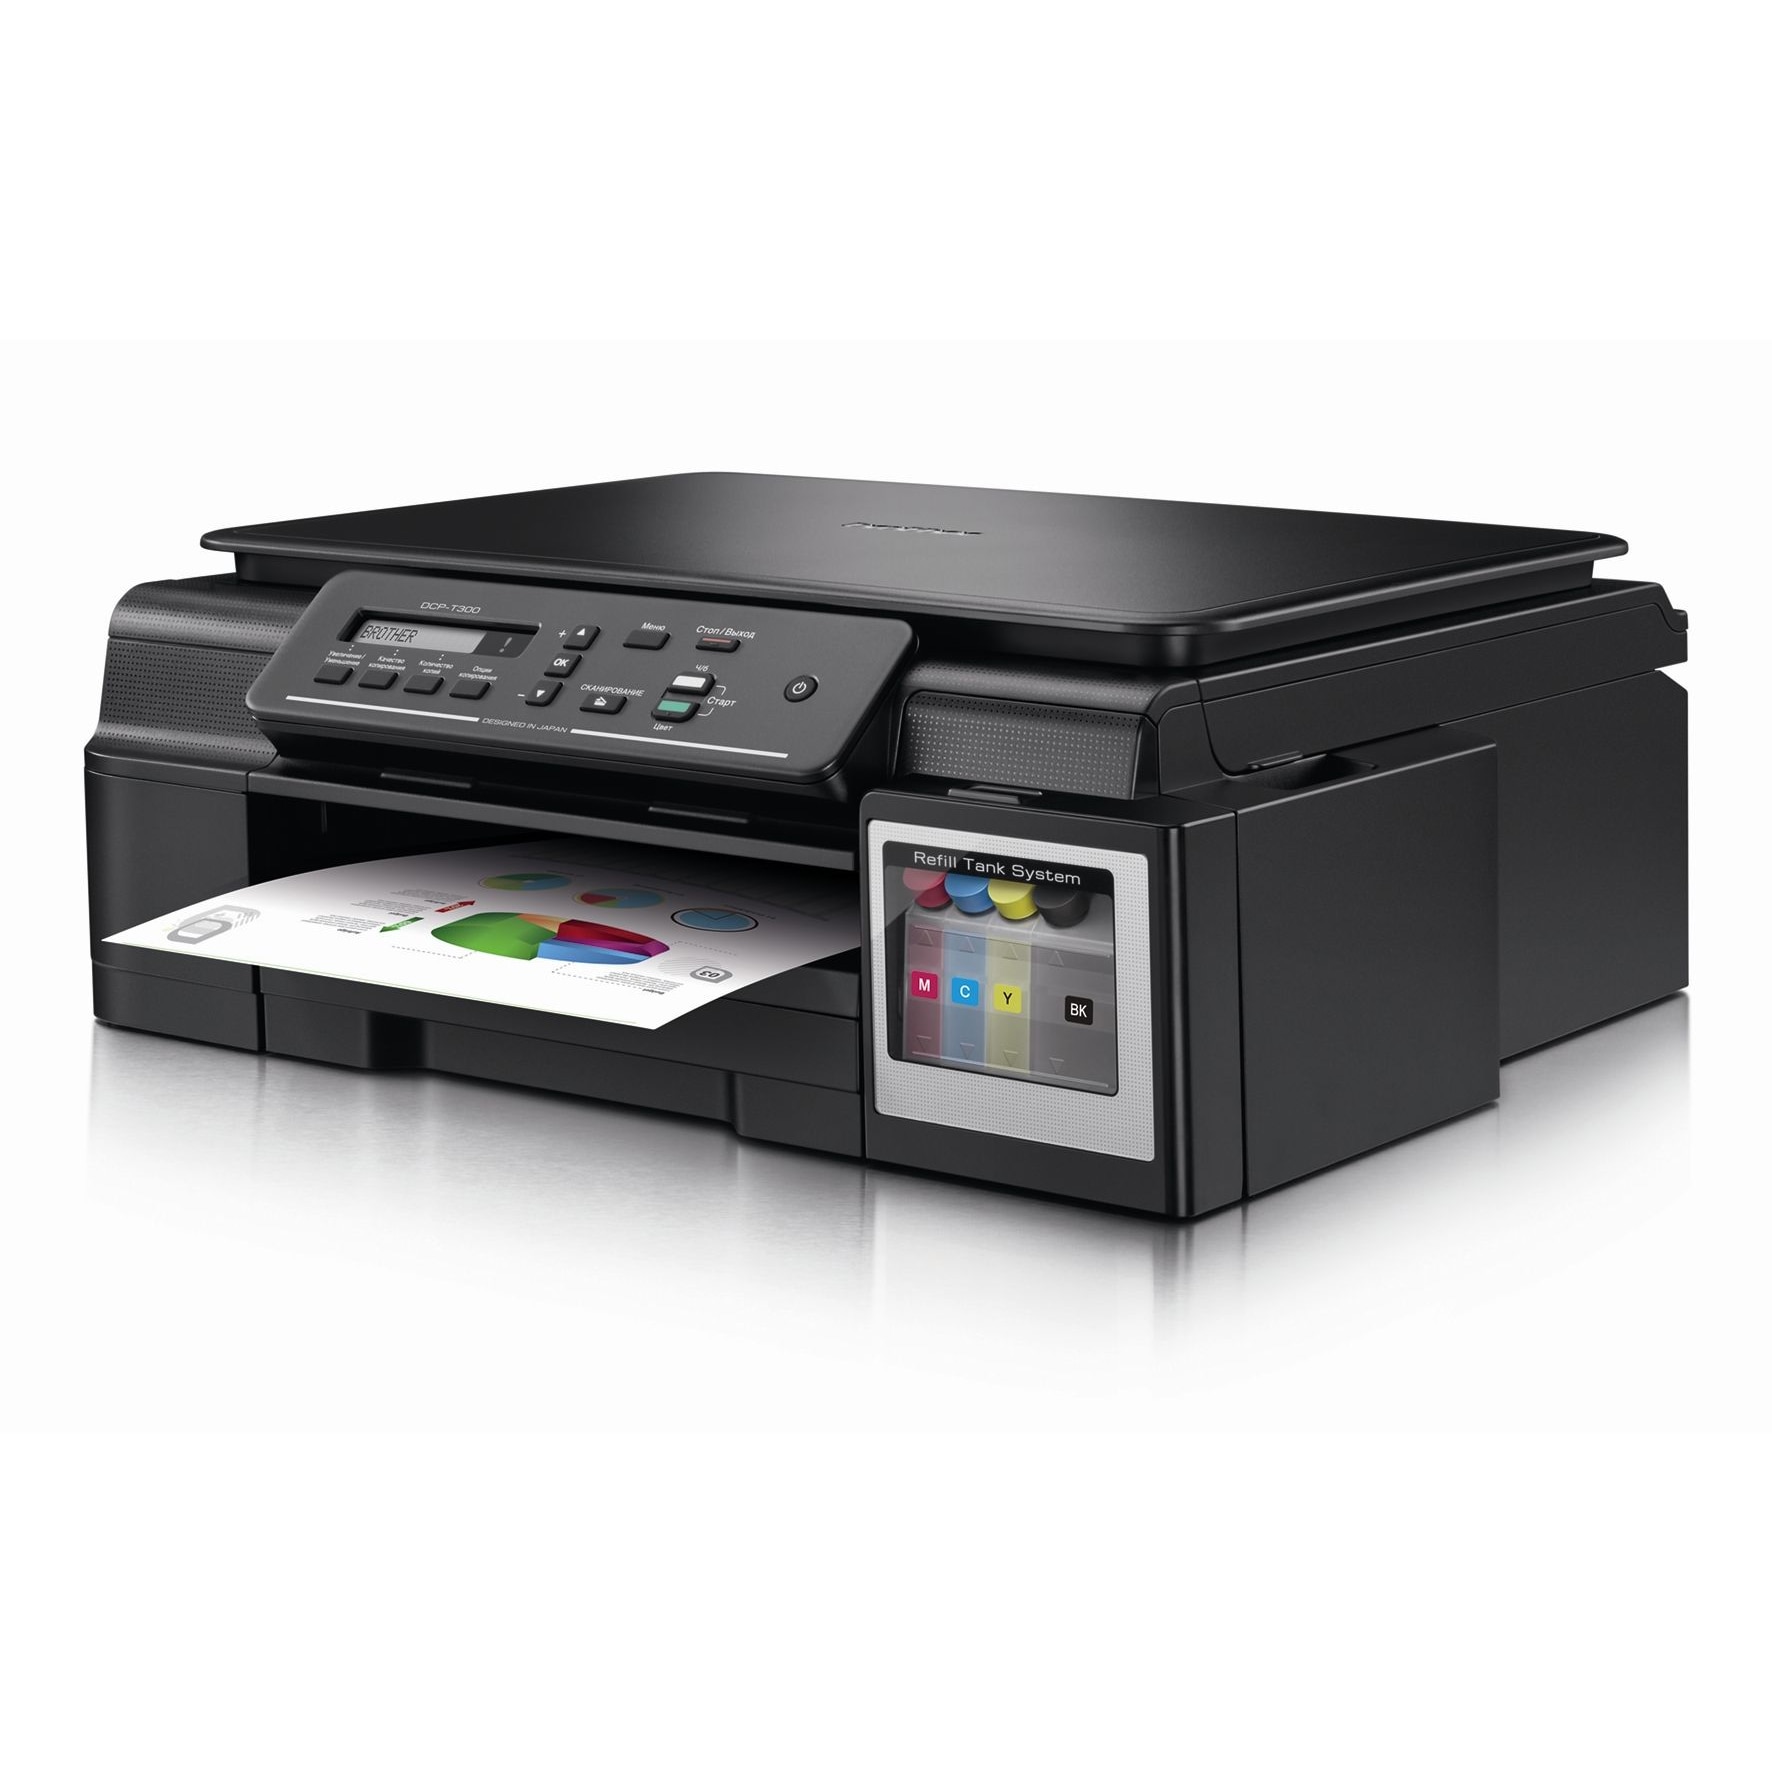 Brother l2550dw. МФУ brother DCP-t310 INKBENEFIT Plus. Brother t300. МФУ струйный brother INKBENEFIT Plus DCP-t520w. Brother t310.